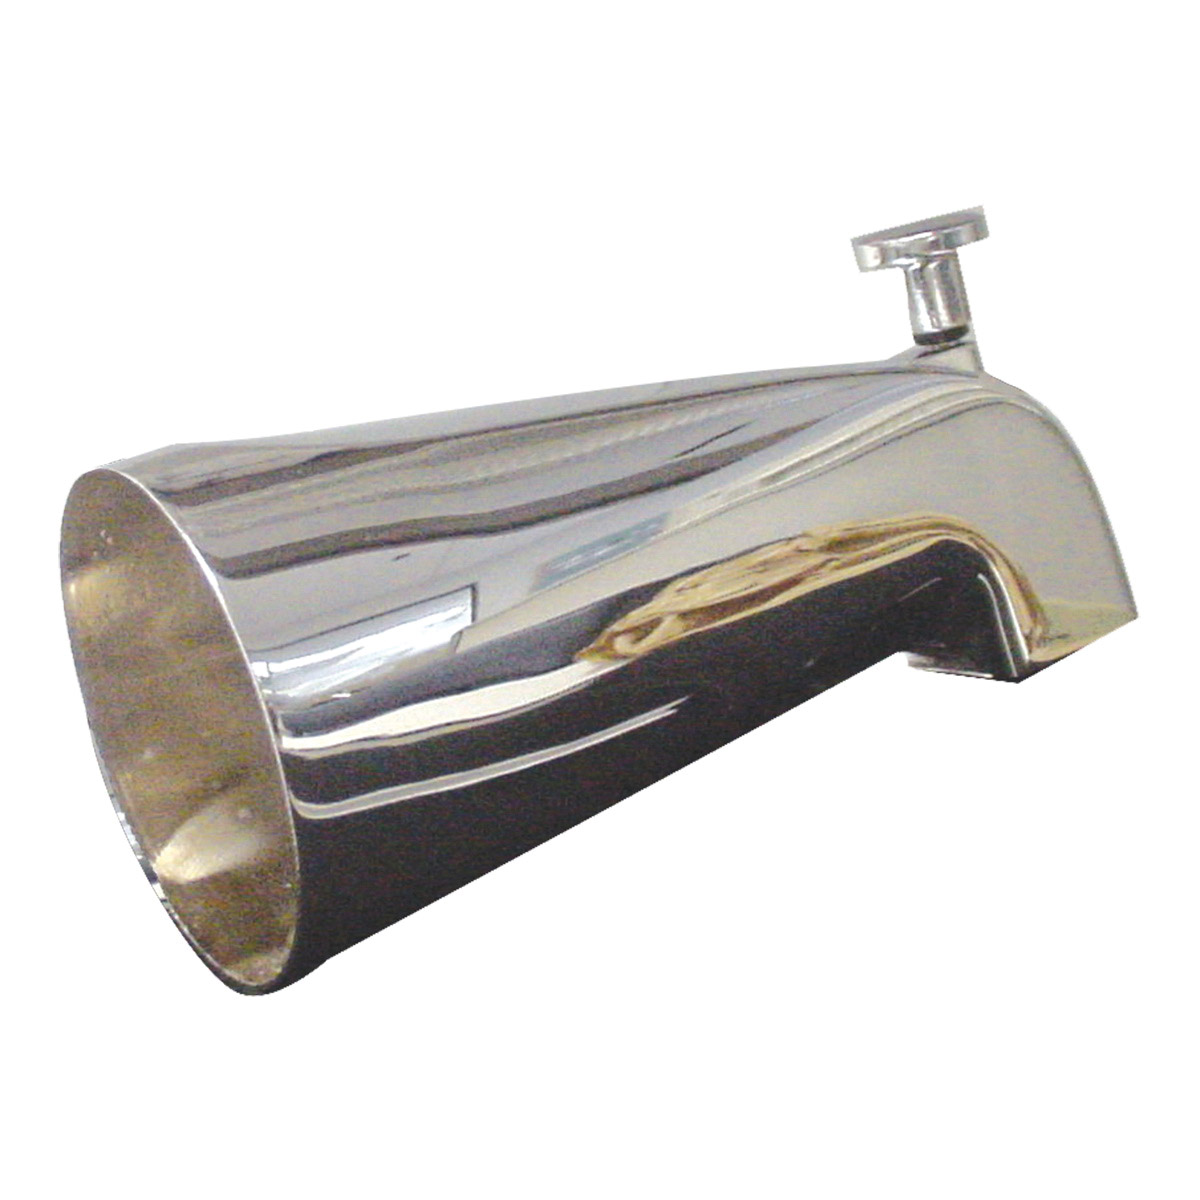 Kissler 82-0011 Diverter Tub Spout, For Use With Universal Fit Sink, Tub and Drain, 1/2 in IPS Nose